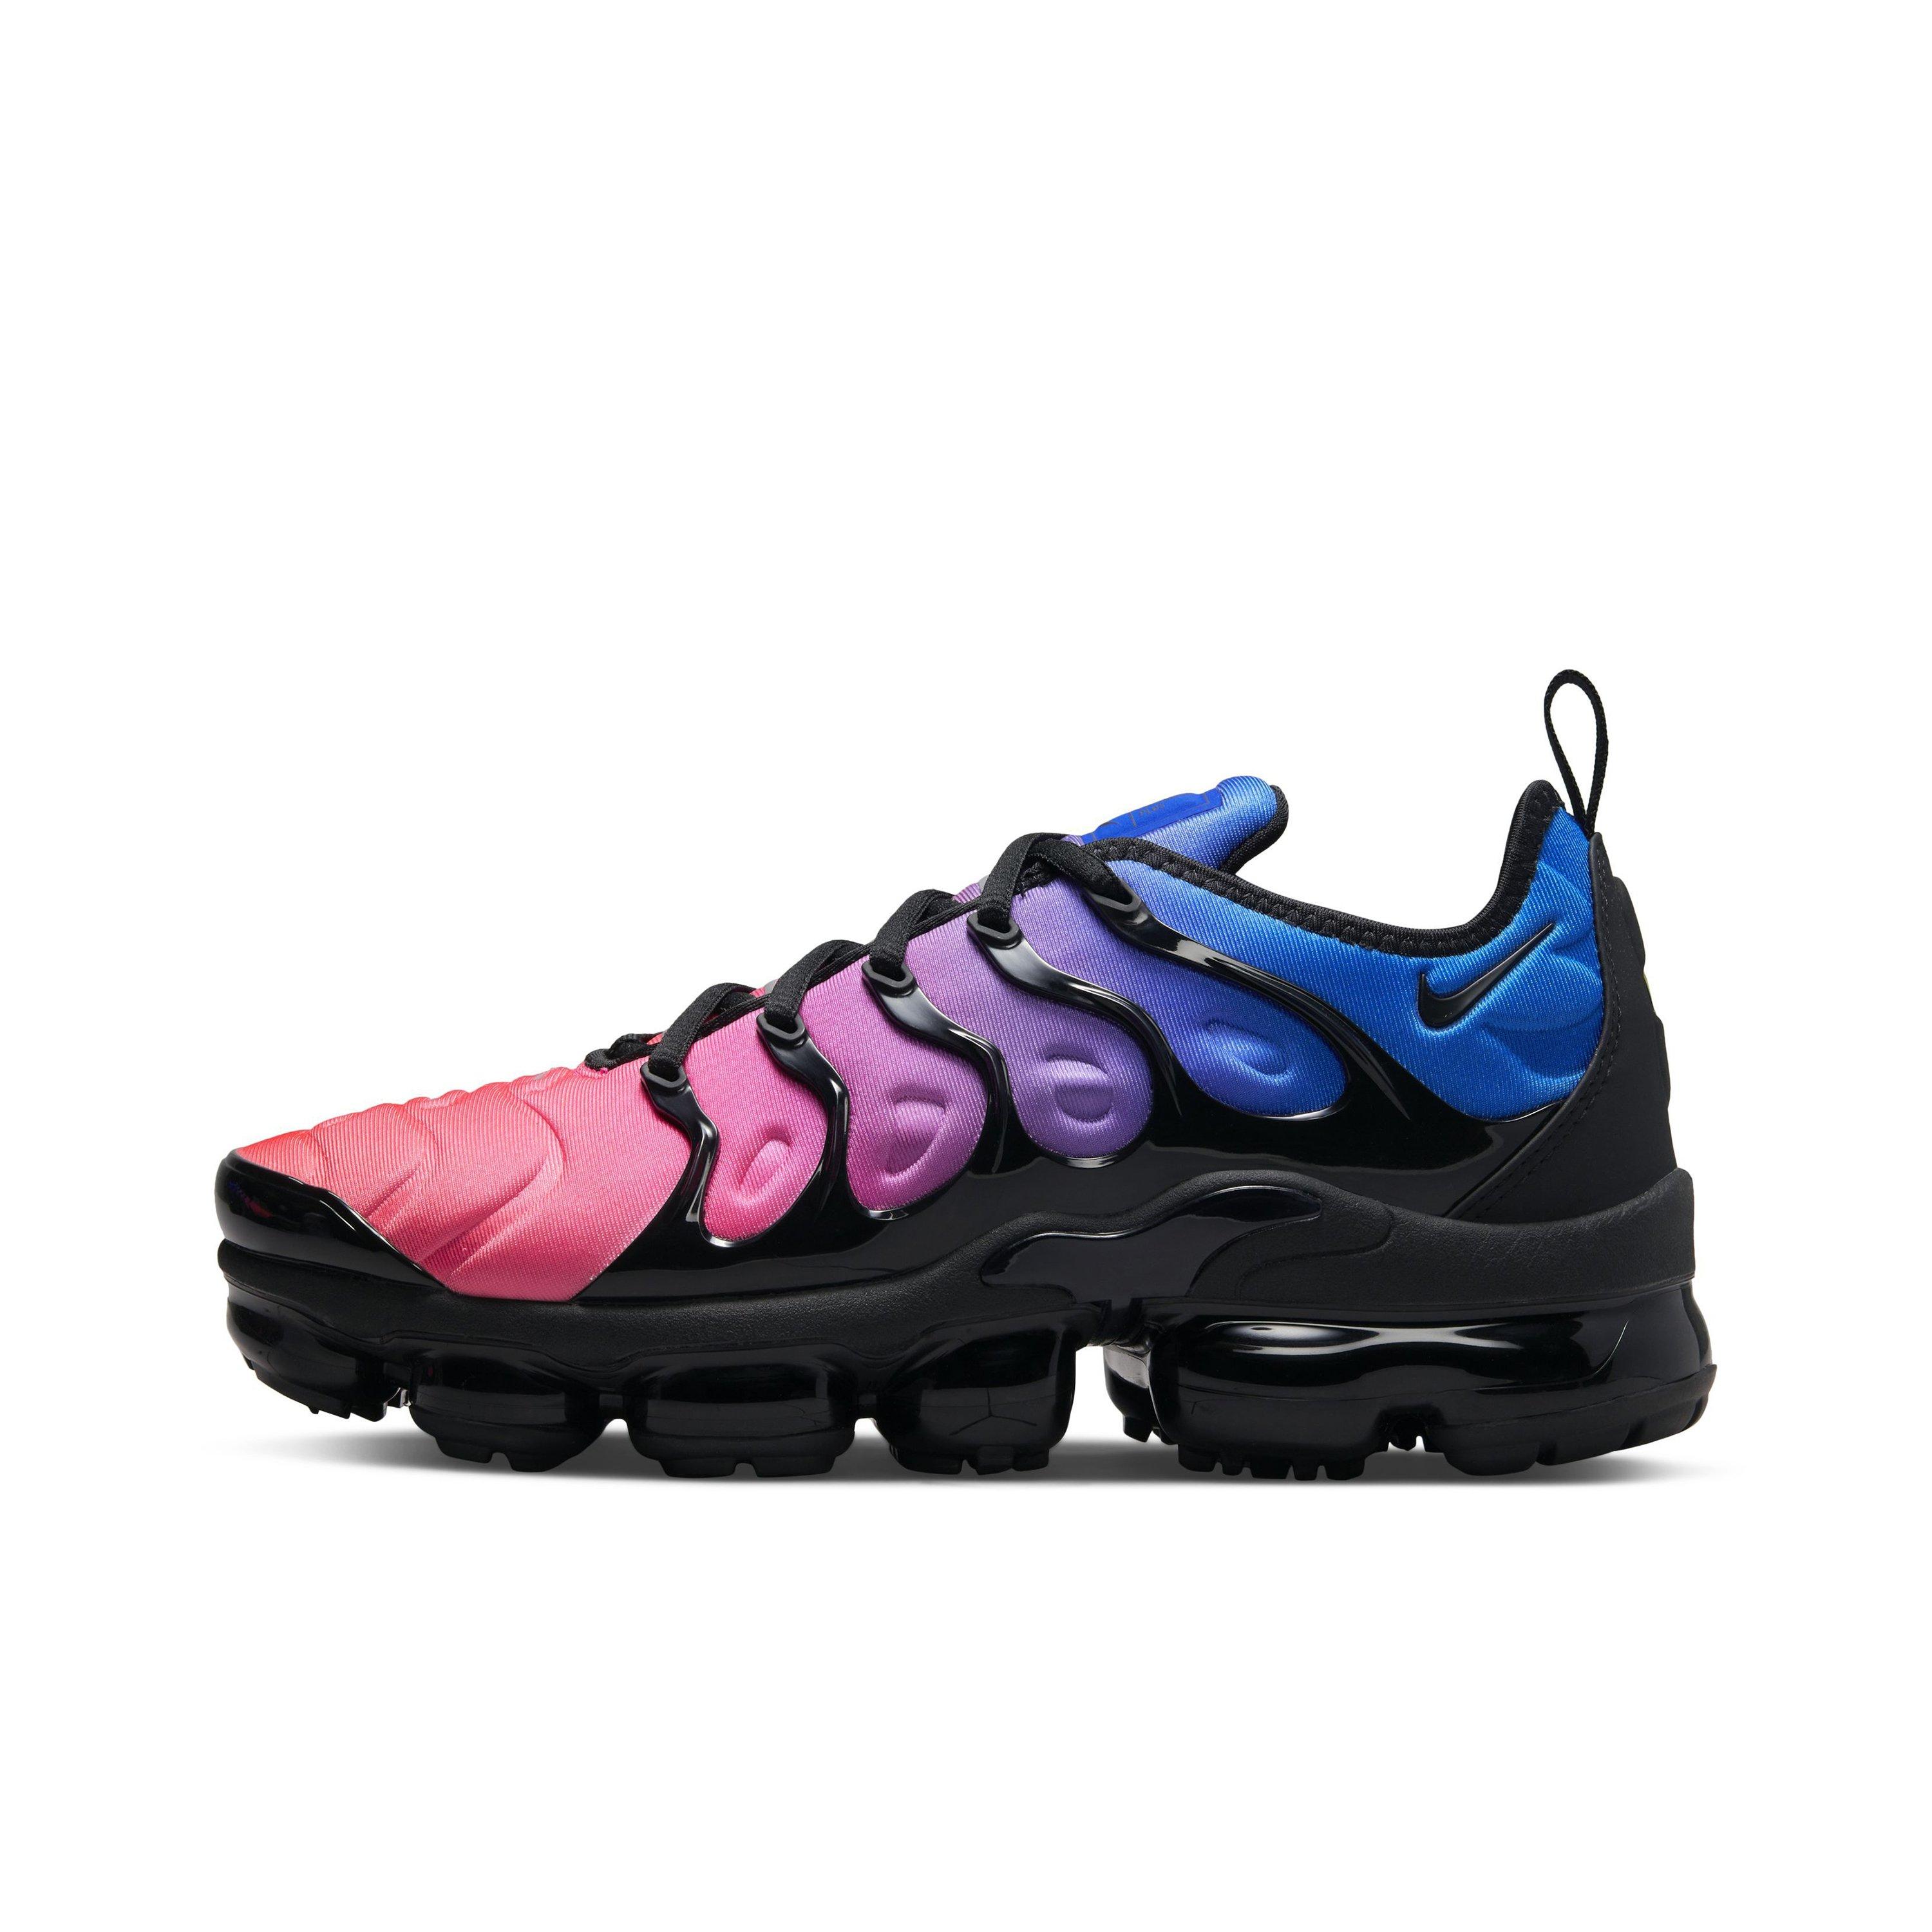 nike vapormax womens pink and blue